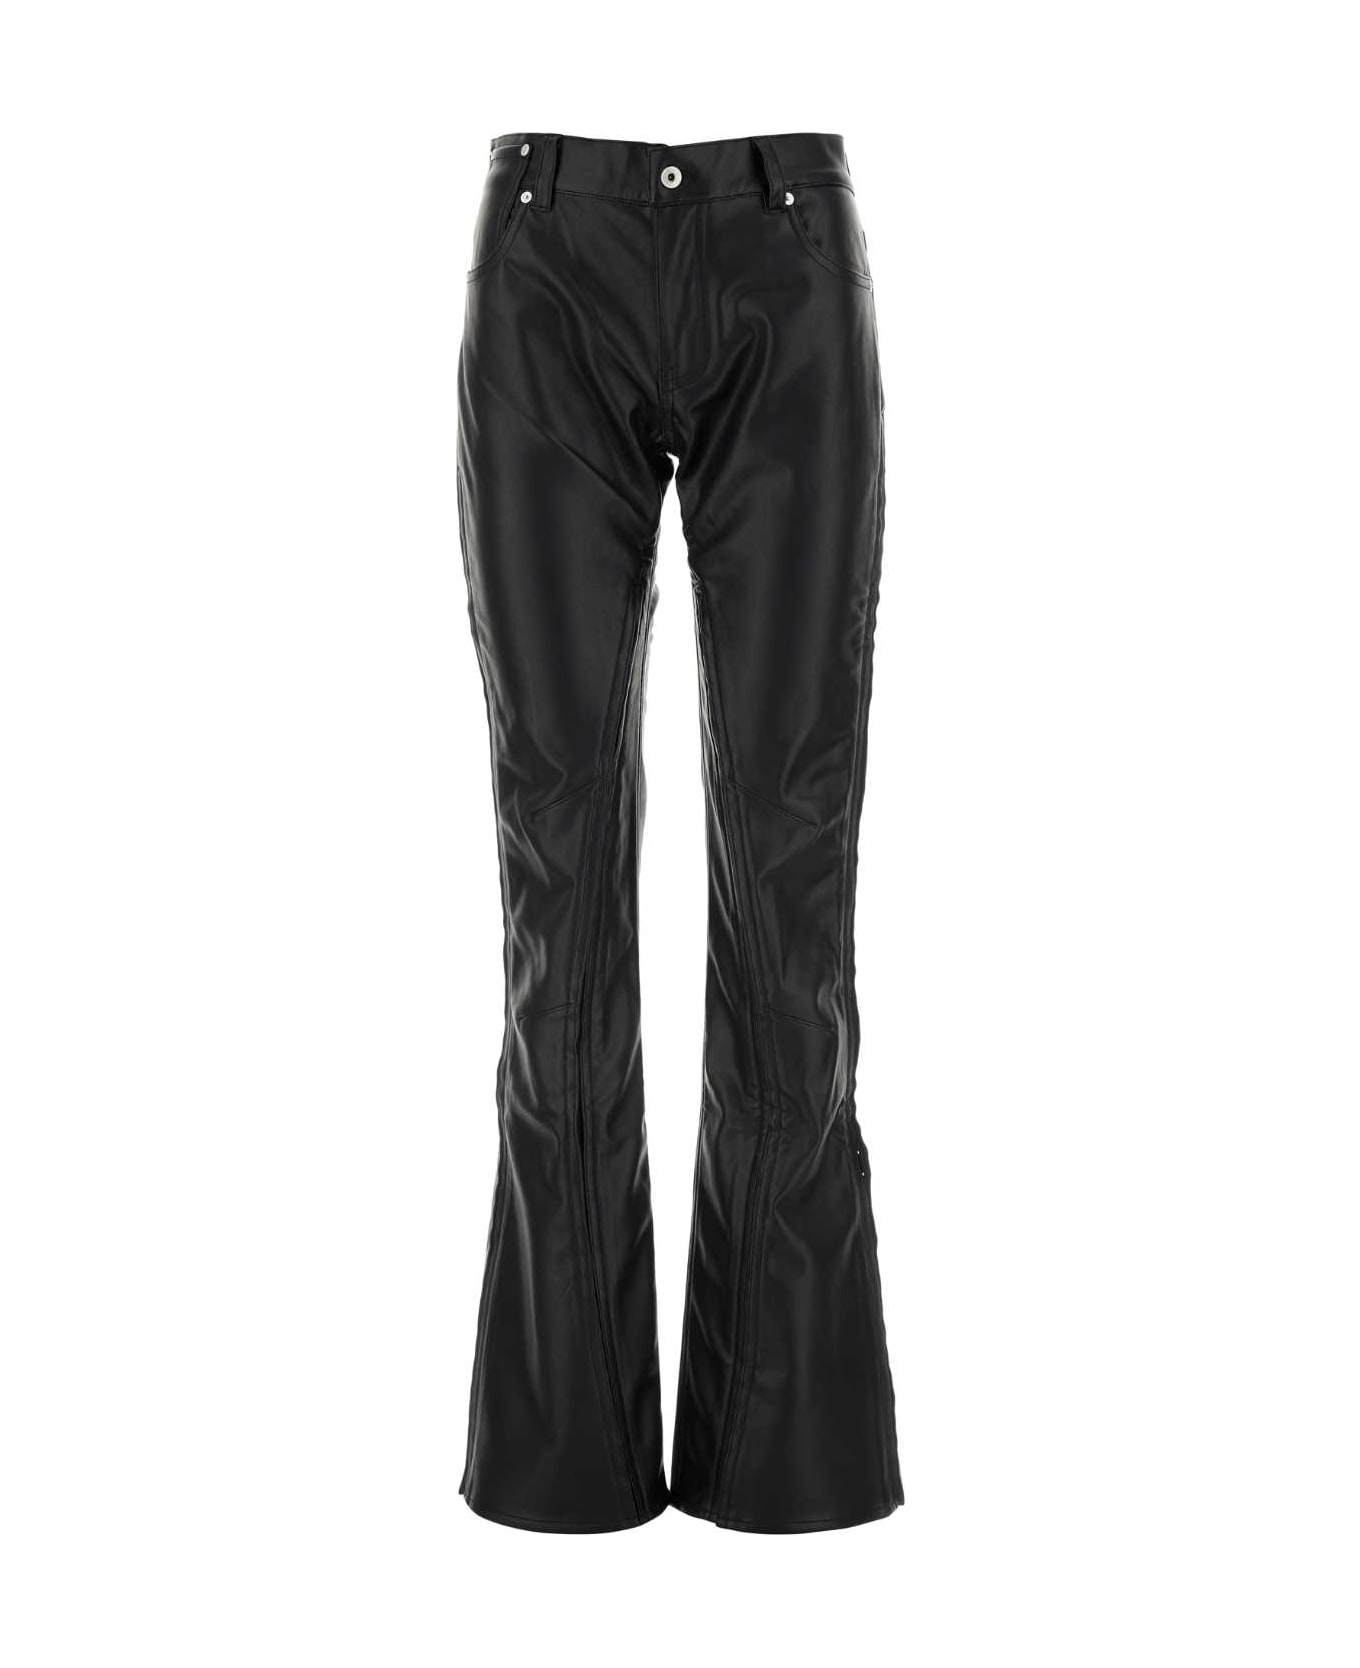 Y/Project Black Synthetic Leather Pant - BLACK ボトムス